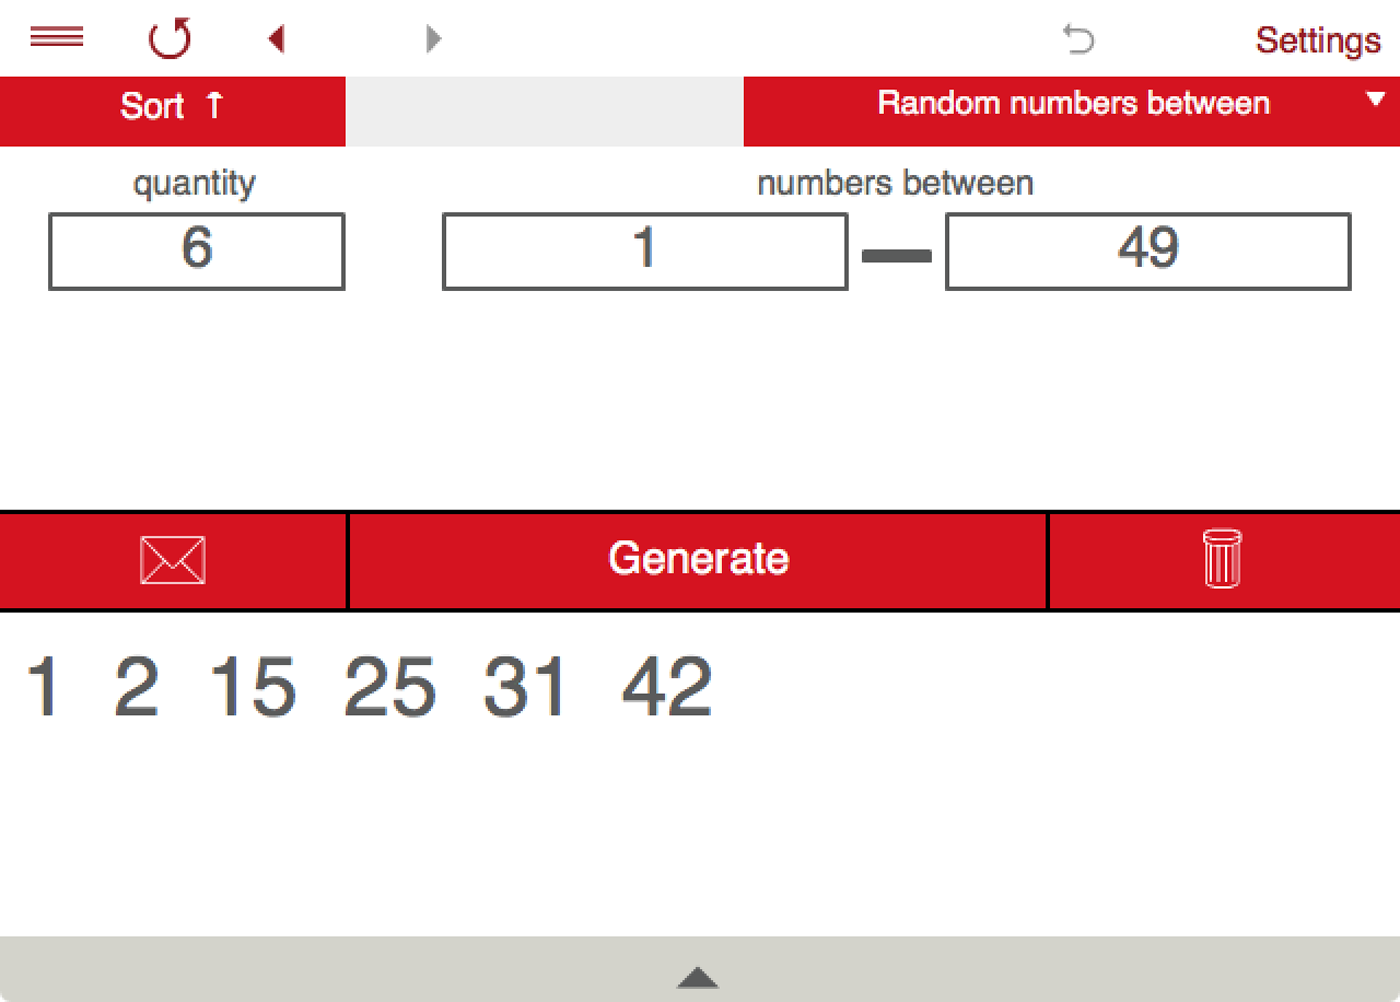 Generates up to 200 random numbers at once. Generated numbers can be sorted.